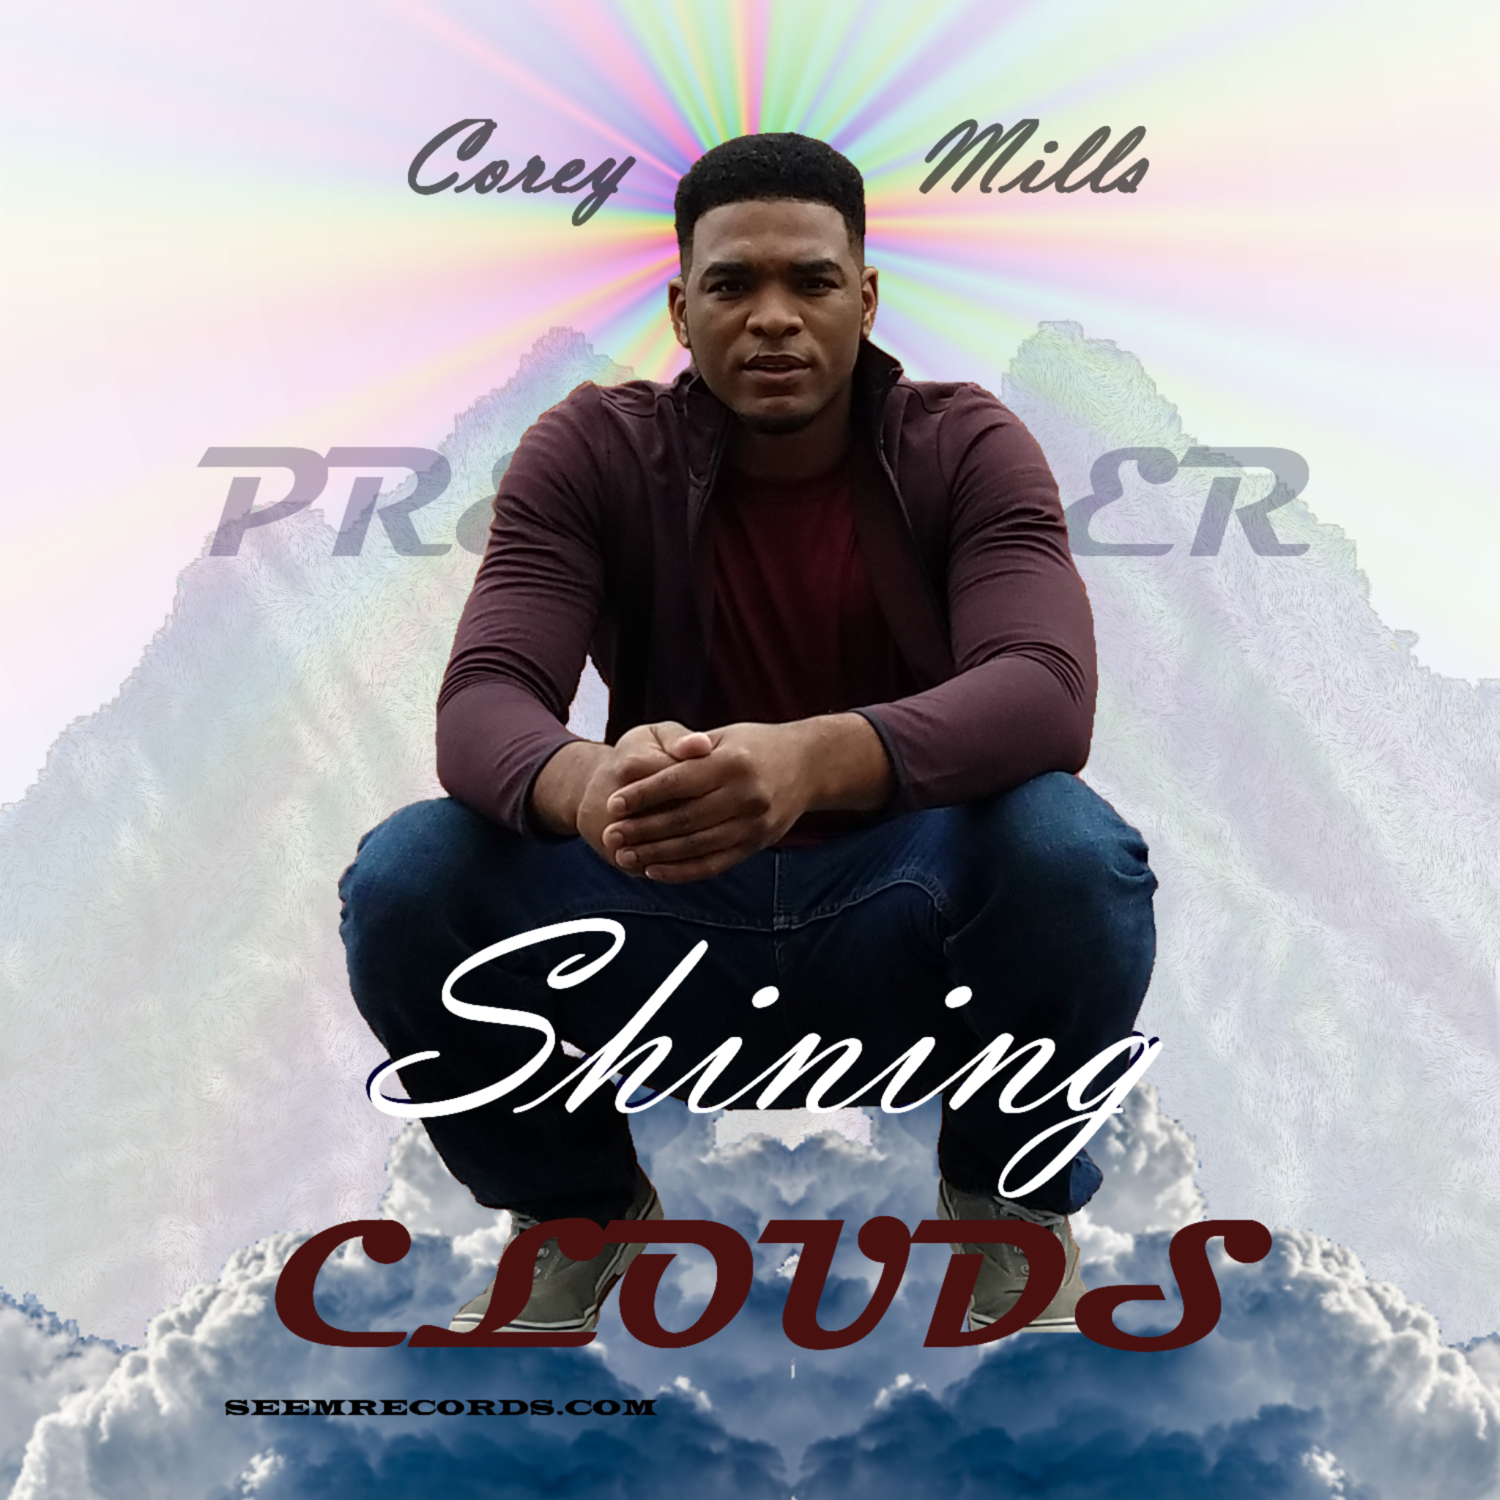 Shining Clouds (Poster/Flyer)